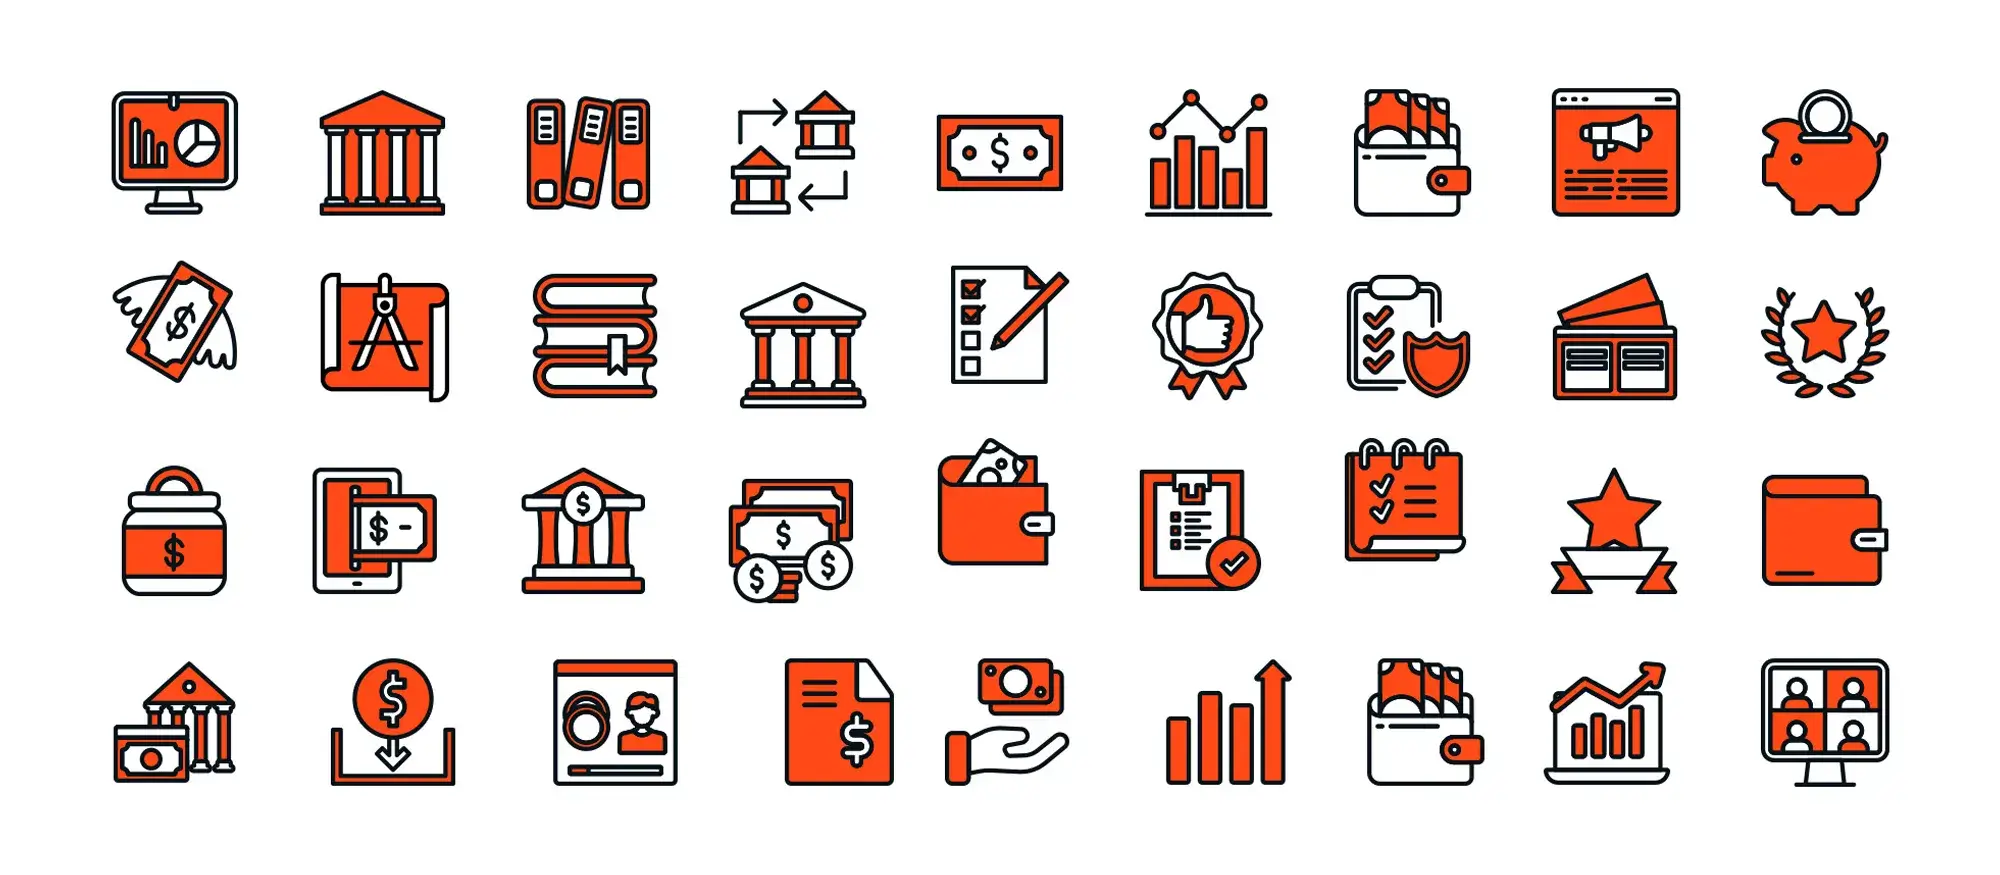 Free WordPress icons for business